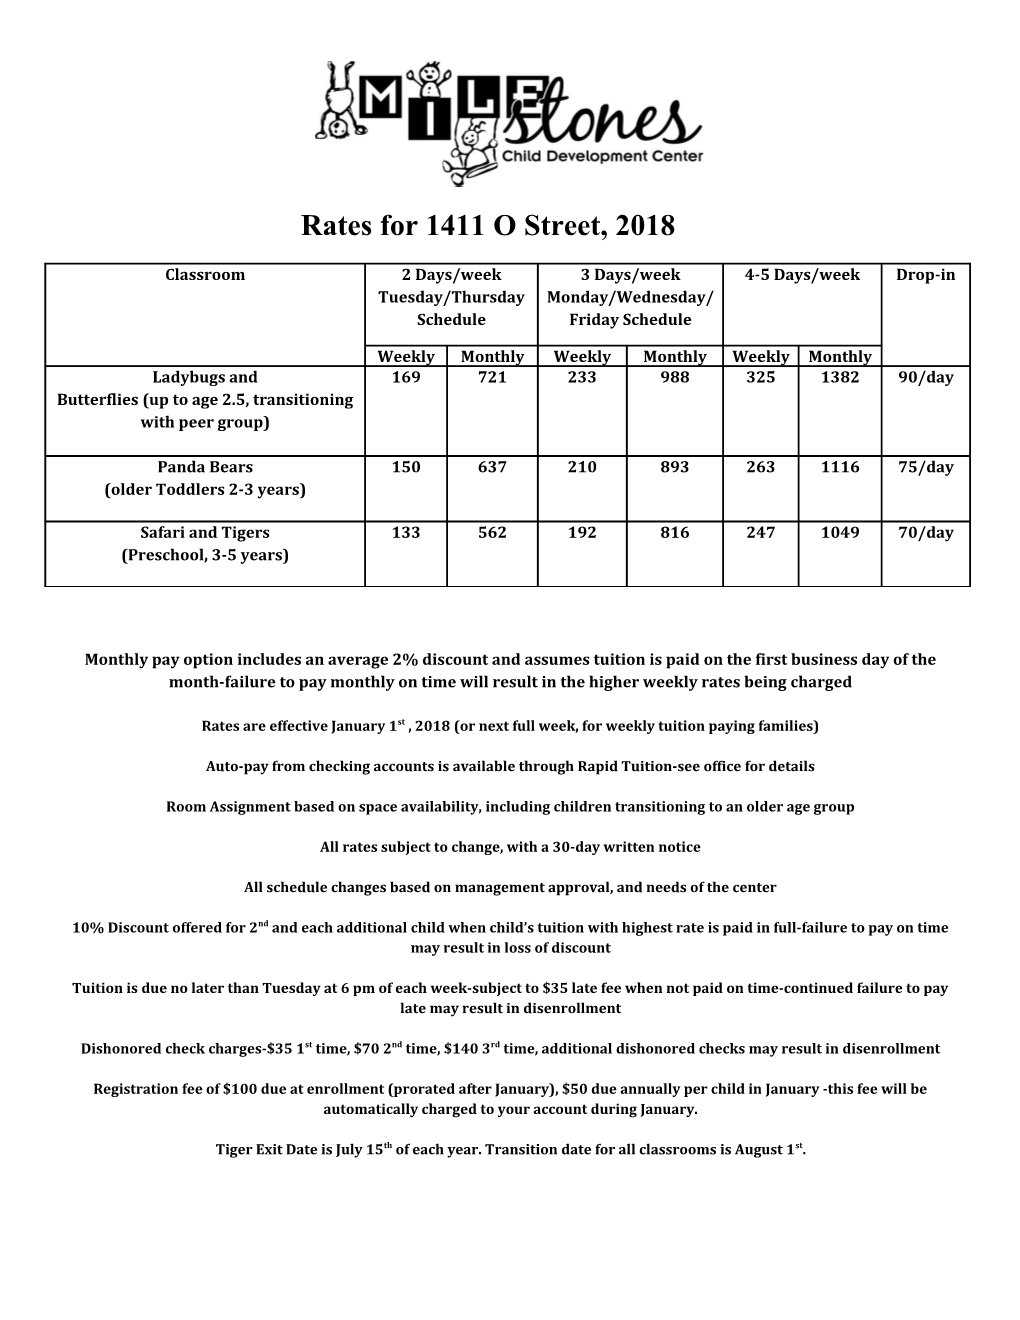 All Rates Subject to Change, with a 30-Day Written Notice